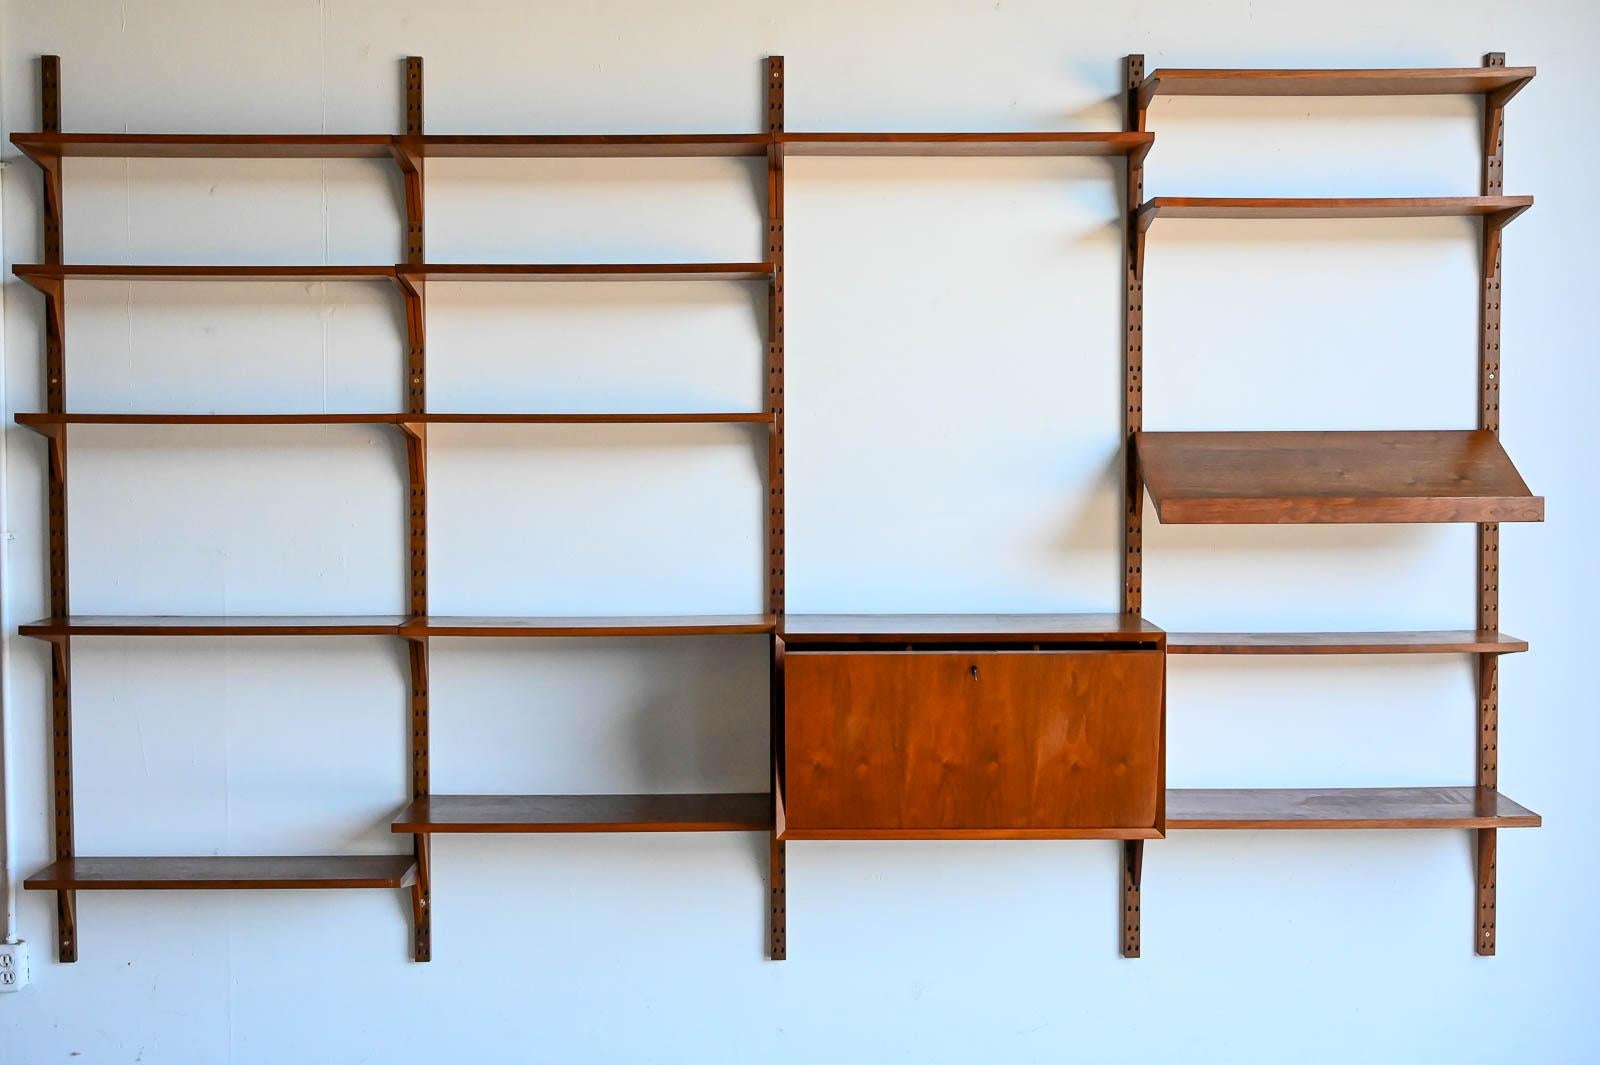 Walnut 4 Bay Poul Cadovius wall unit, ca. 1962. Beautiful walnut shelves and brackets with walnut supports. From original owner in good condition. Can be configured any way you like. Everything included as shown, including original metal bookends